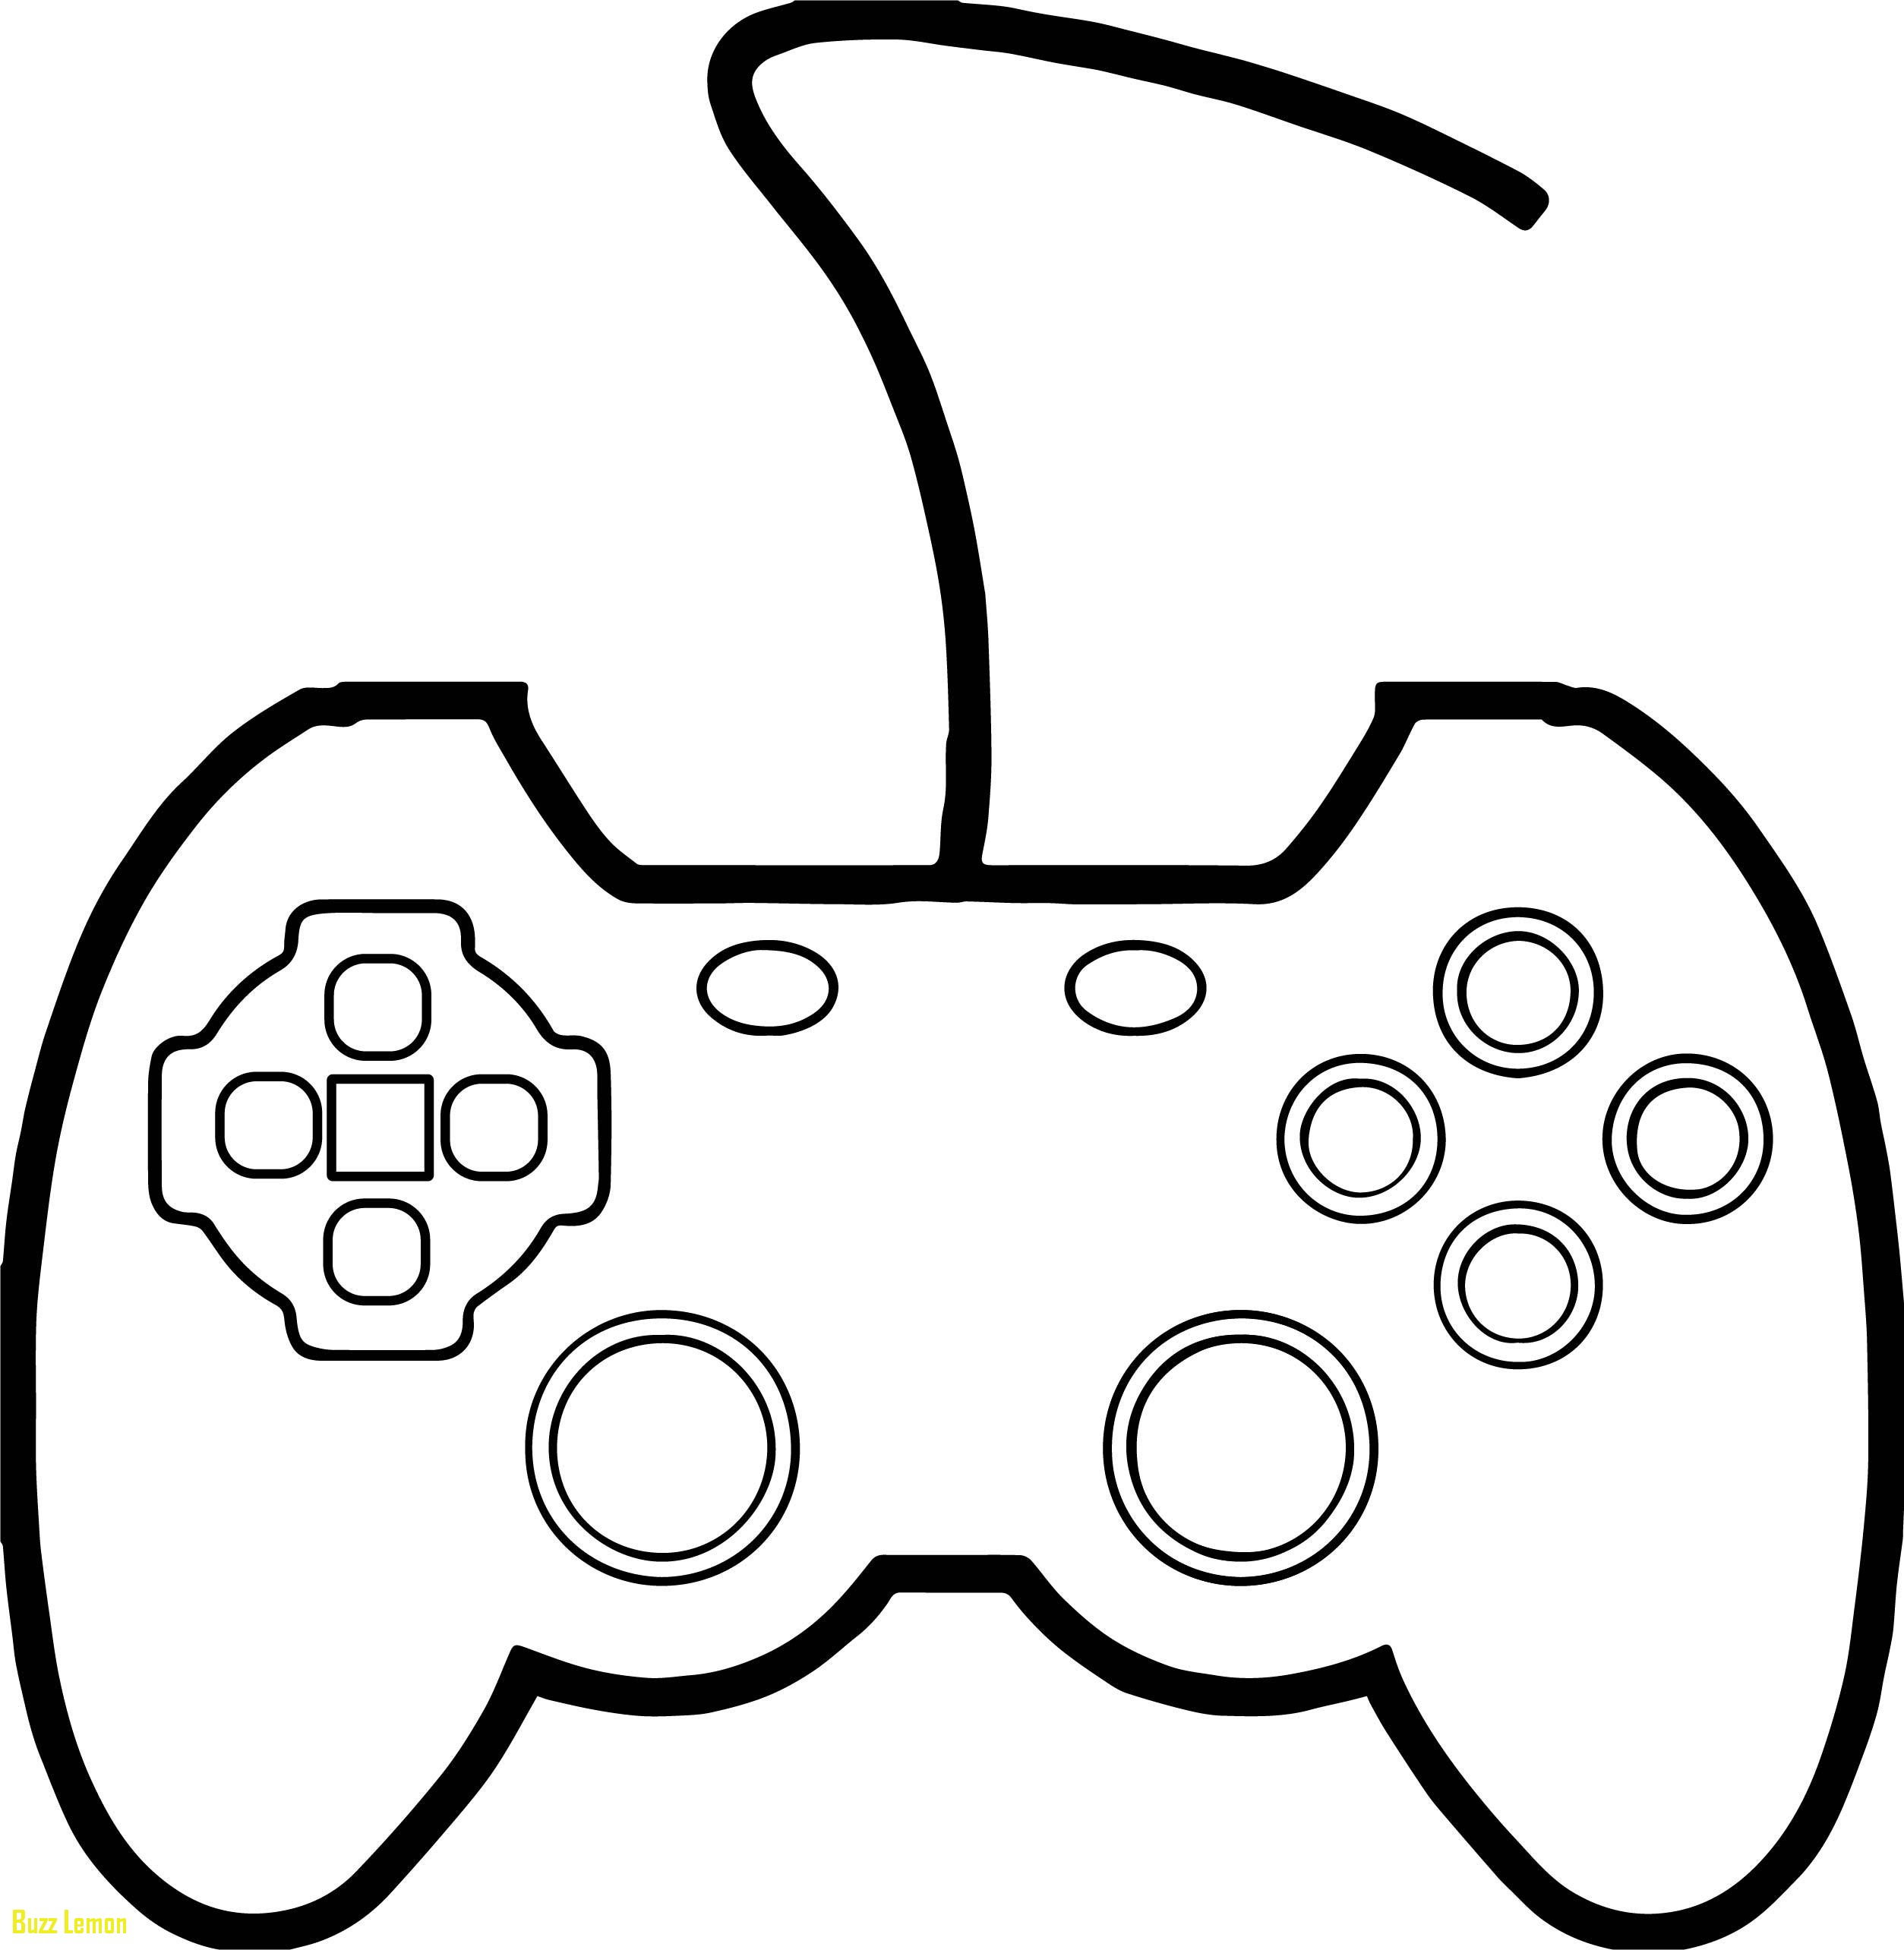 Xbox Controller Coloring Pages at GetColorings.com | Free printable